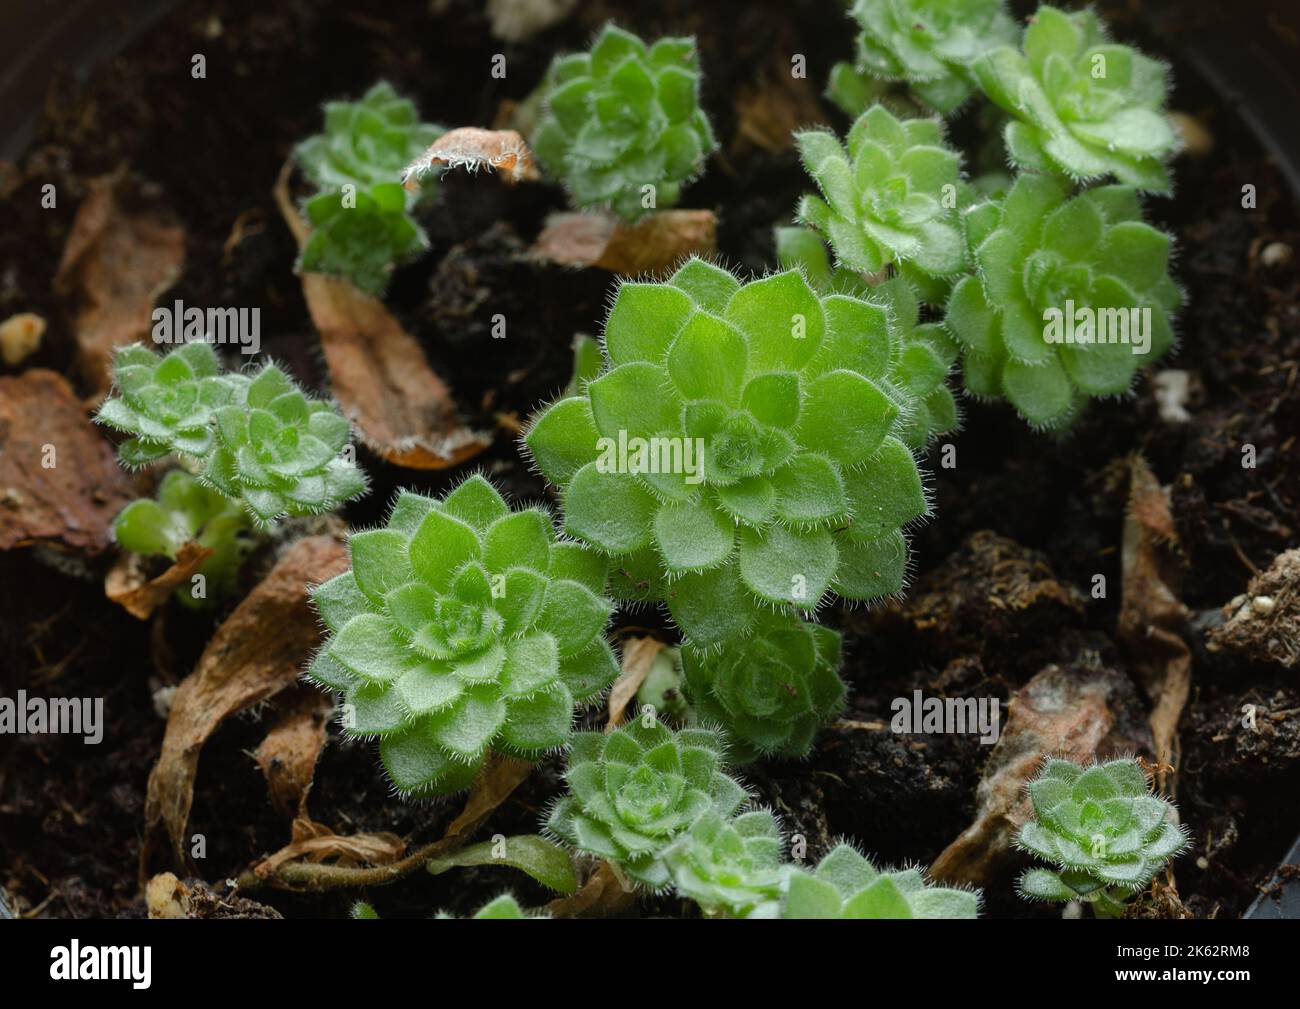 Nursery of small succulent plants propagated by leaves. Aeonium tabuliforme. Stock Photo